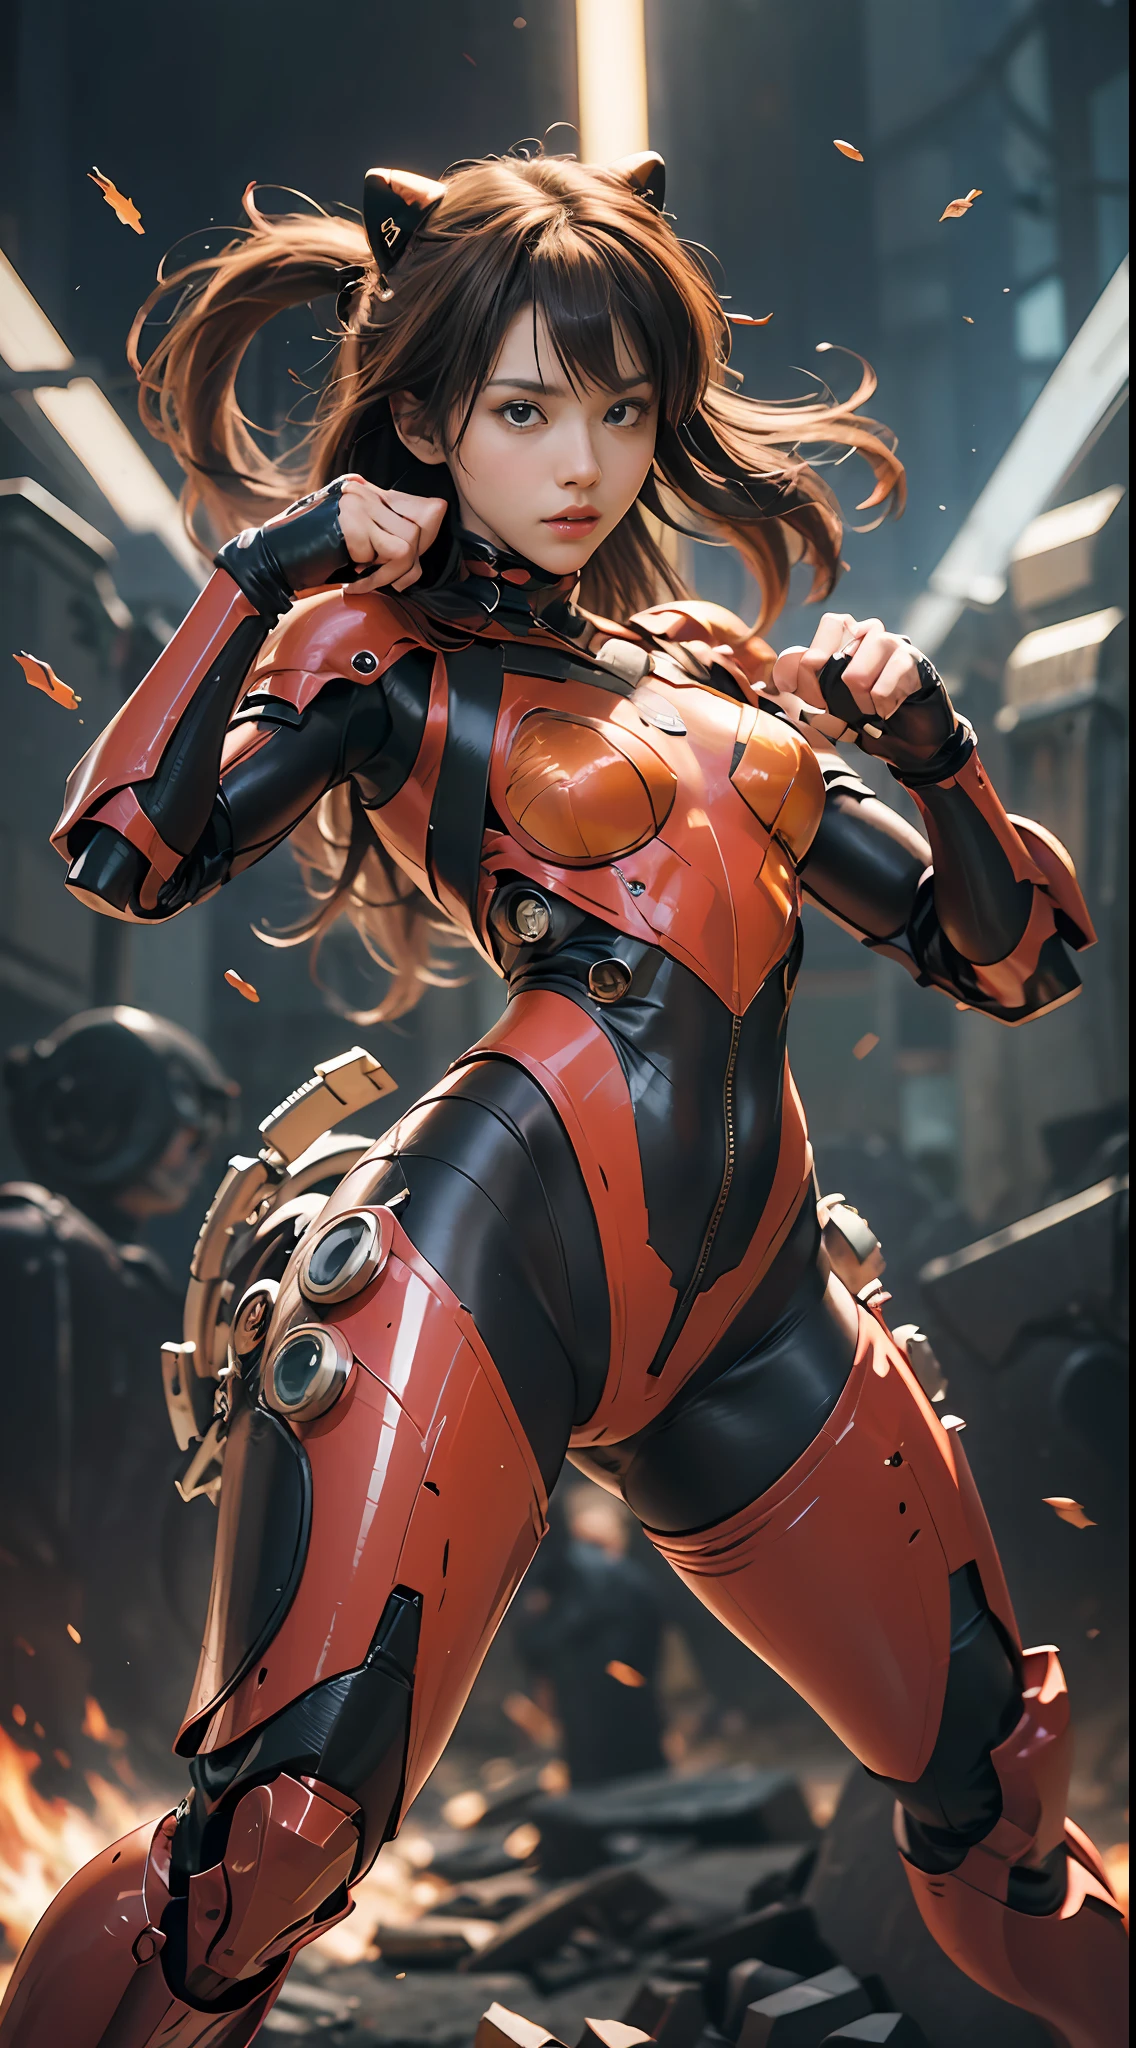 （tmasterpiece，），（best qualtiy），photorealestic，Realistis，ultra - detailed，s the perfect face，Perfect body，1 rapariga，beuaty girl，Girl in full body armor，robotic hand，Hedgehog mechanical armor，Hedgehog exoskeleton,Combat posture, fighter pose, fightingpose, actionpose, battle action pose, anime pose, dramatic action pose, in a fighting pose, confident action pose, Cool pose, posing for a fight, posing ready for a fight, The bad guys shoot the whole body，super wide shot